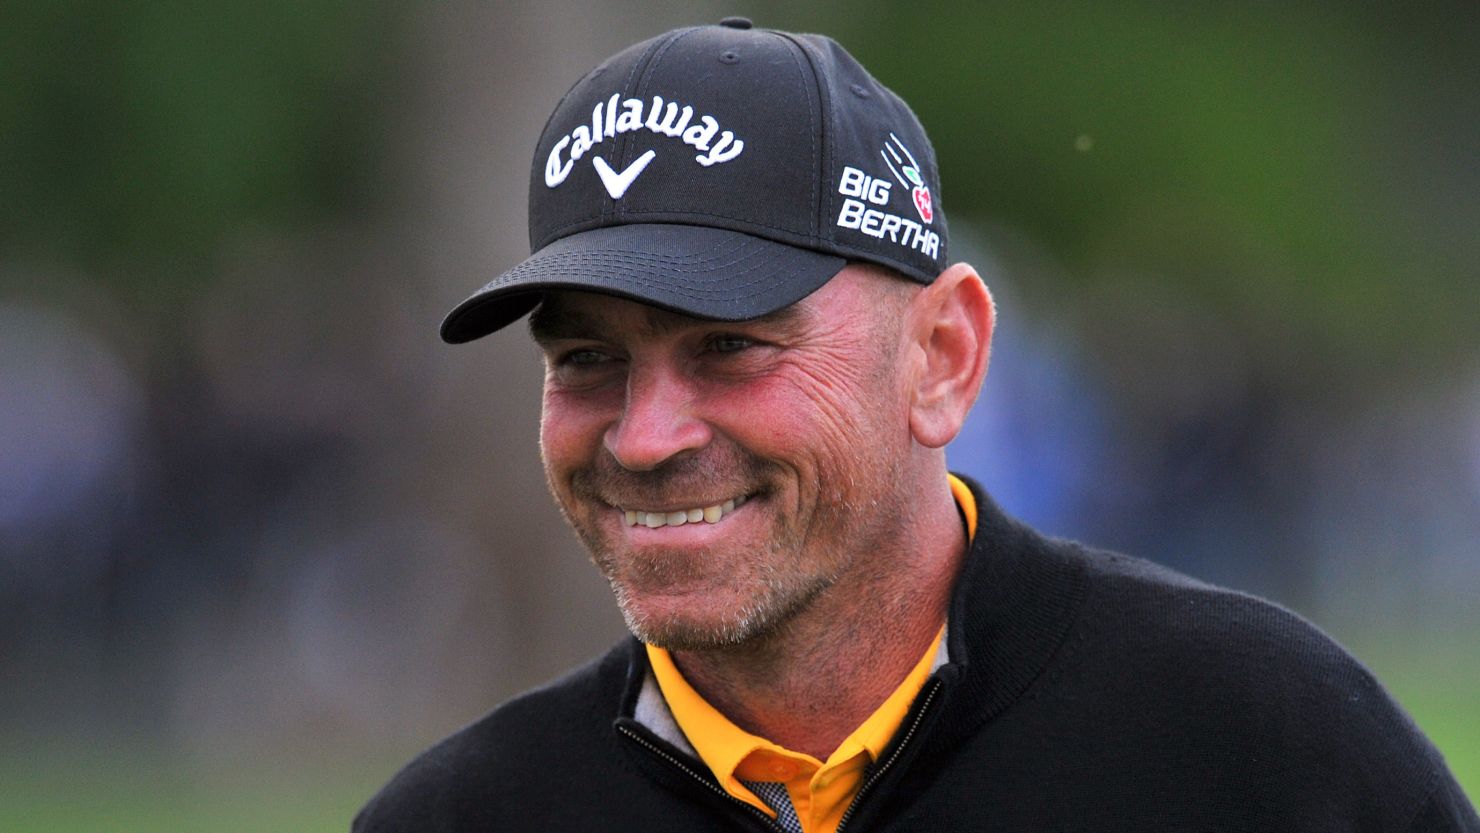 Thomas Bjorn is all smiles on his way to a five-under 67 to open a five-shot lead at the PGA Championships at Wentworth.